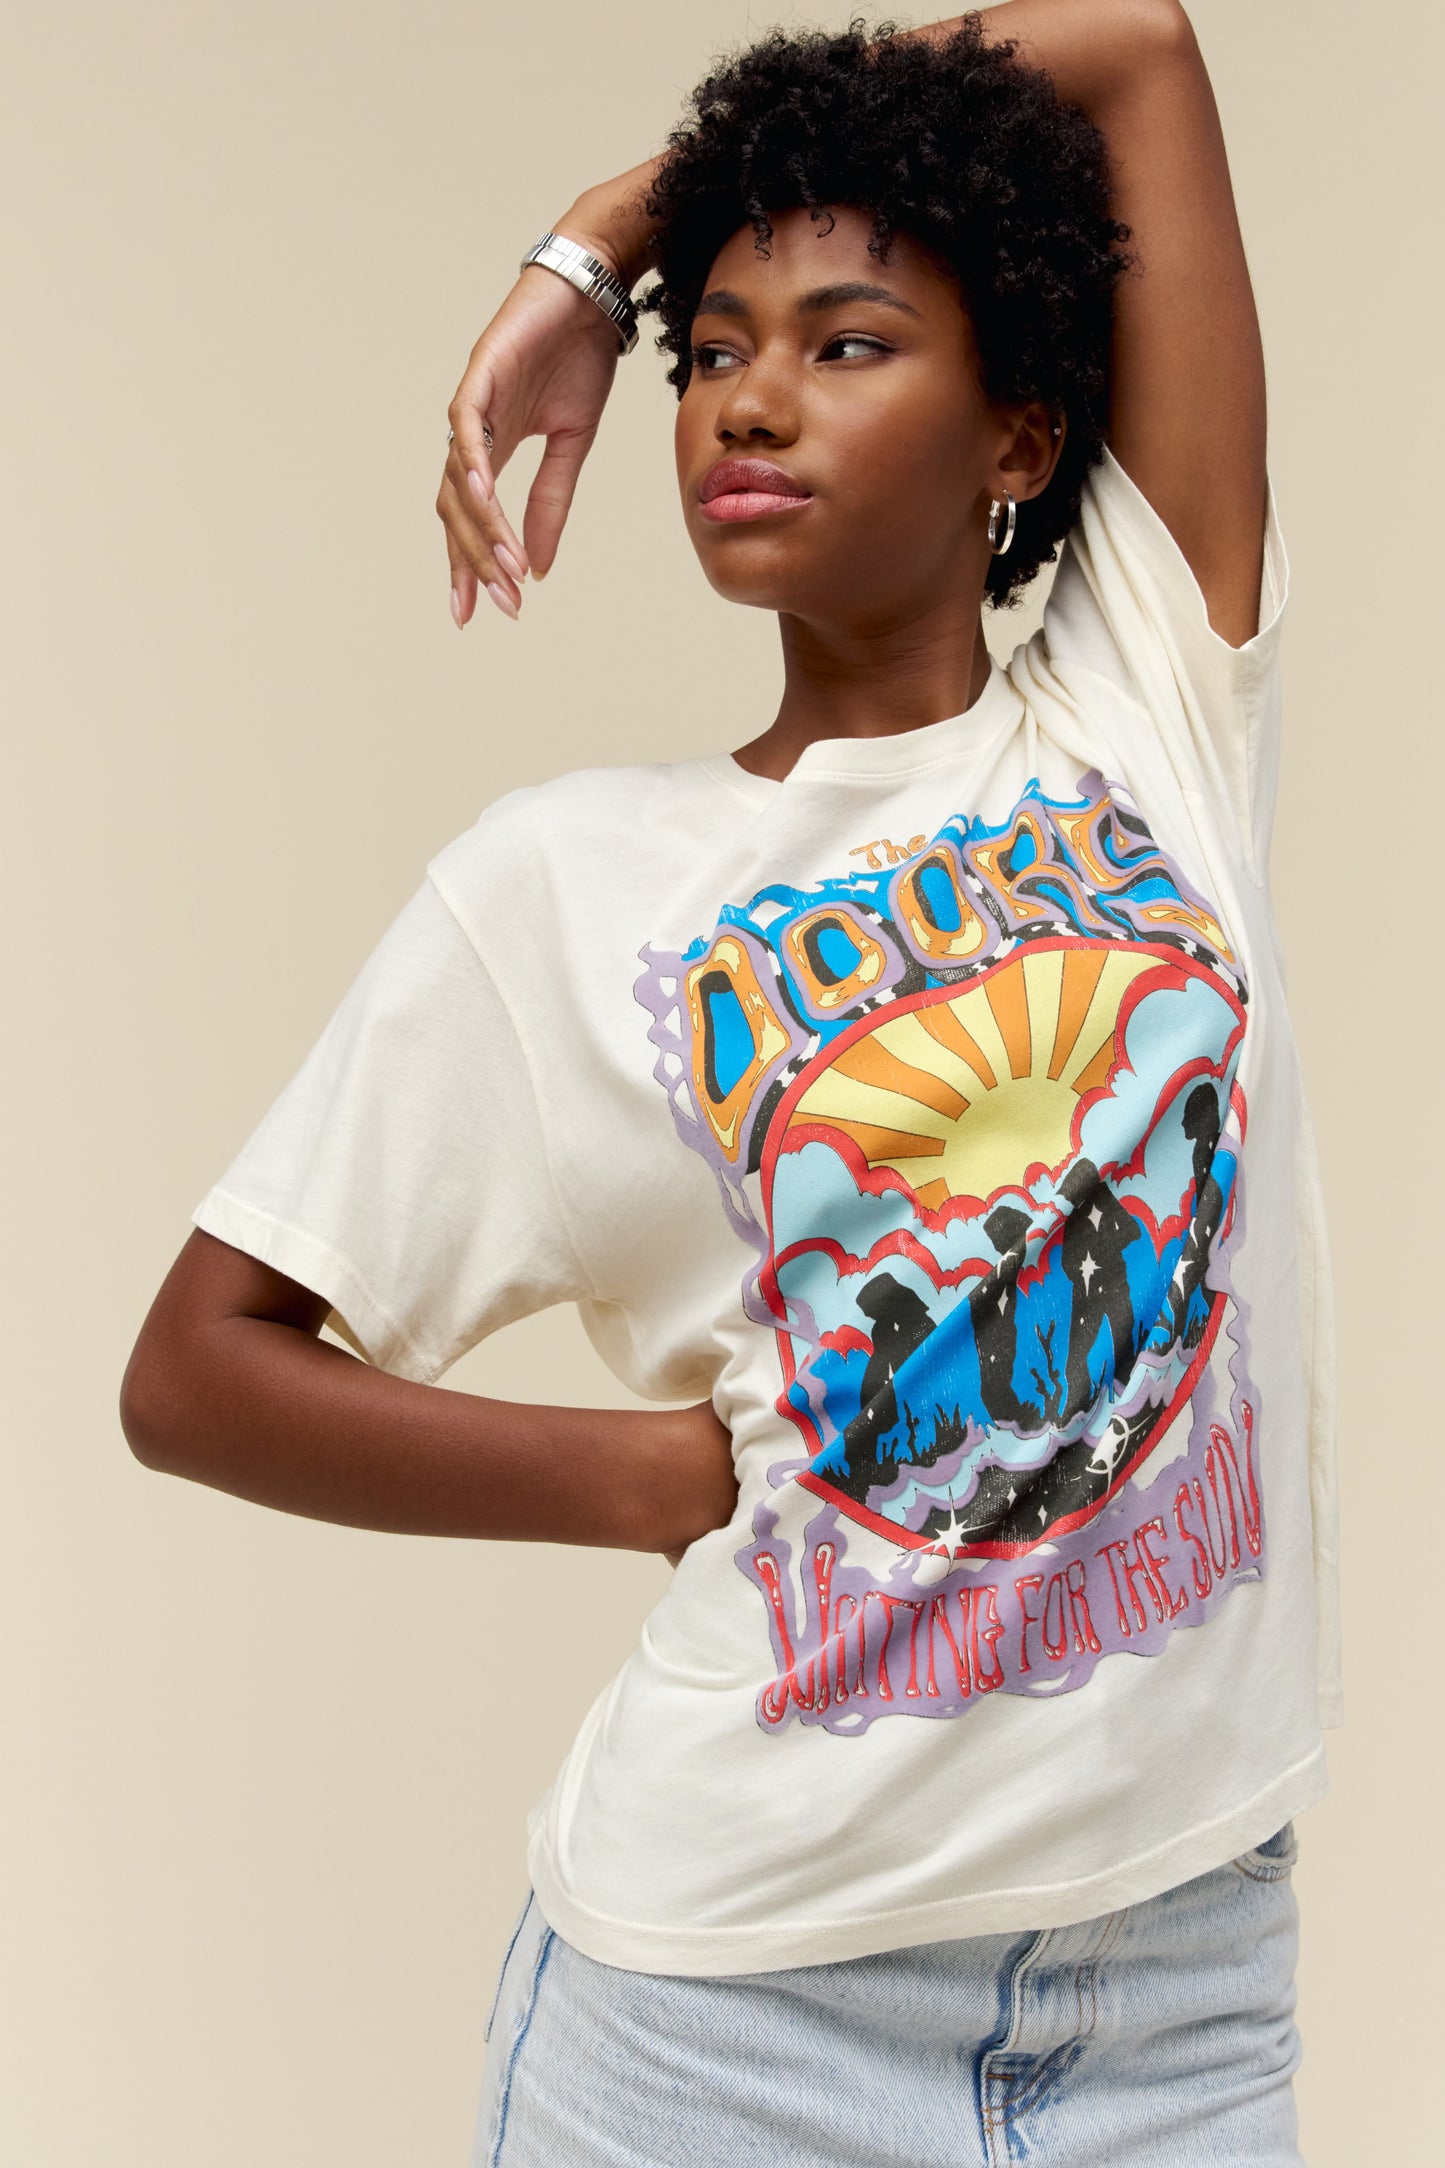 A model featuring a white tee designed with an exclusive rendition of The Door’s lead members at sunrise, inspired by the album’s original cover.